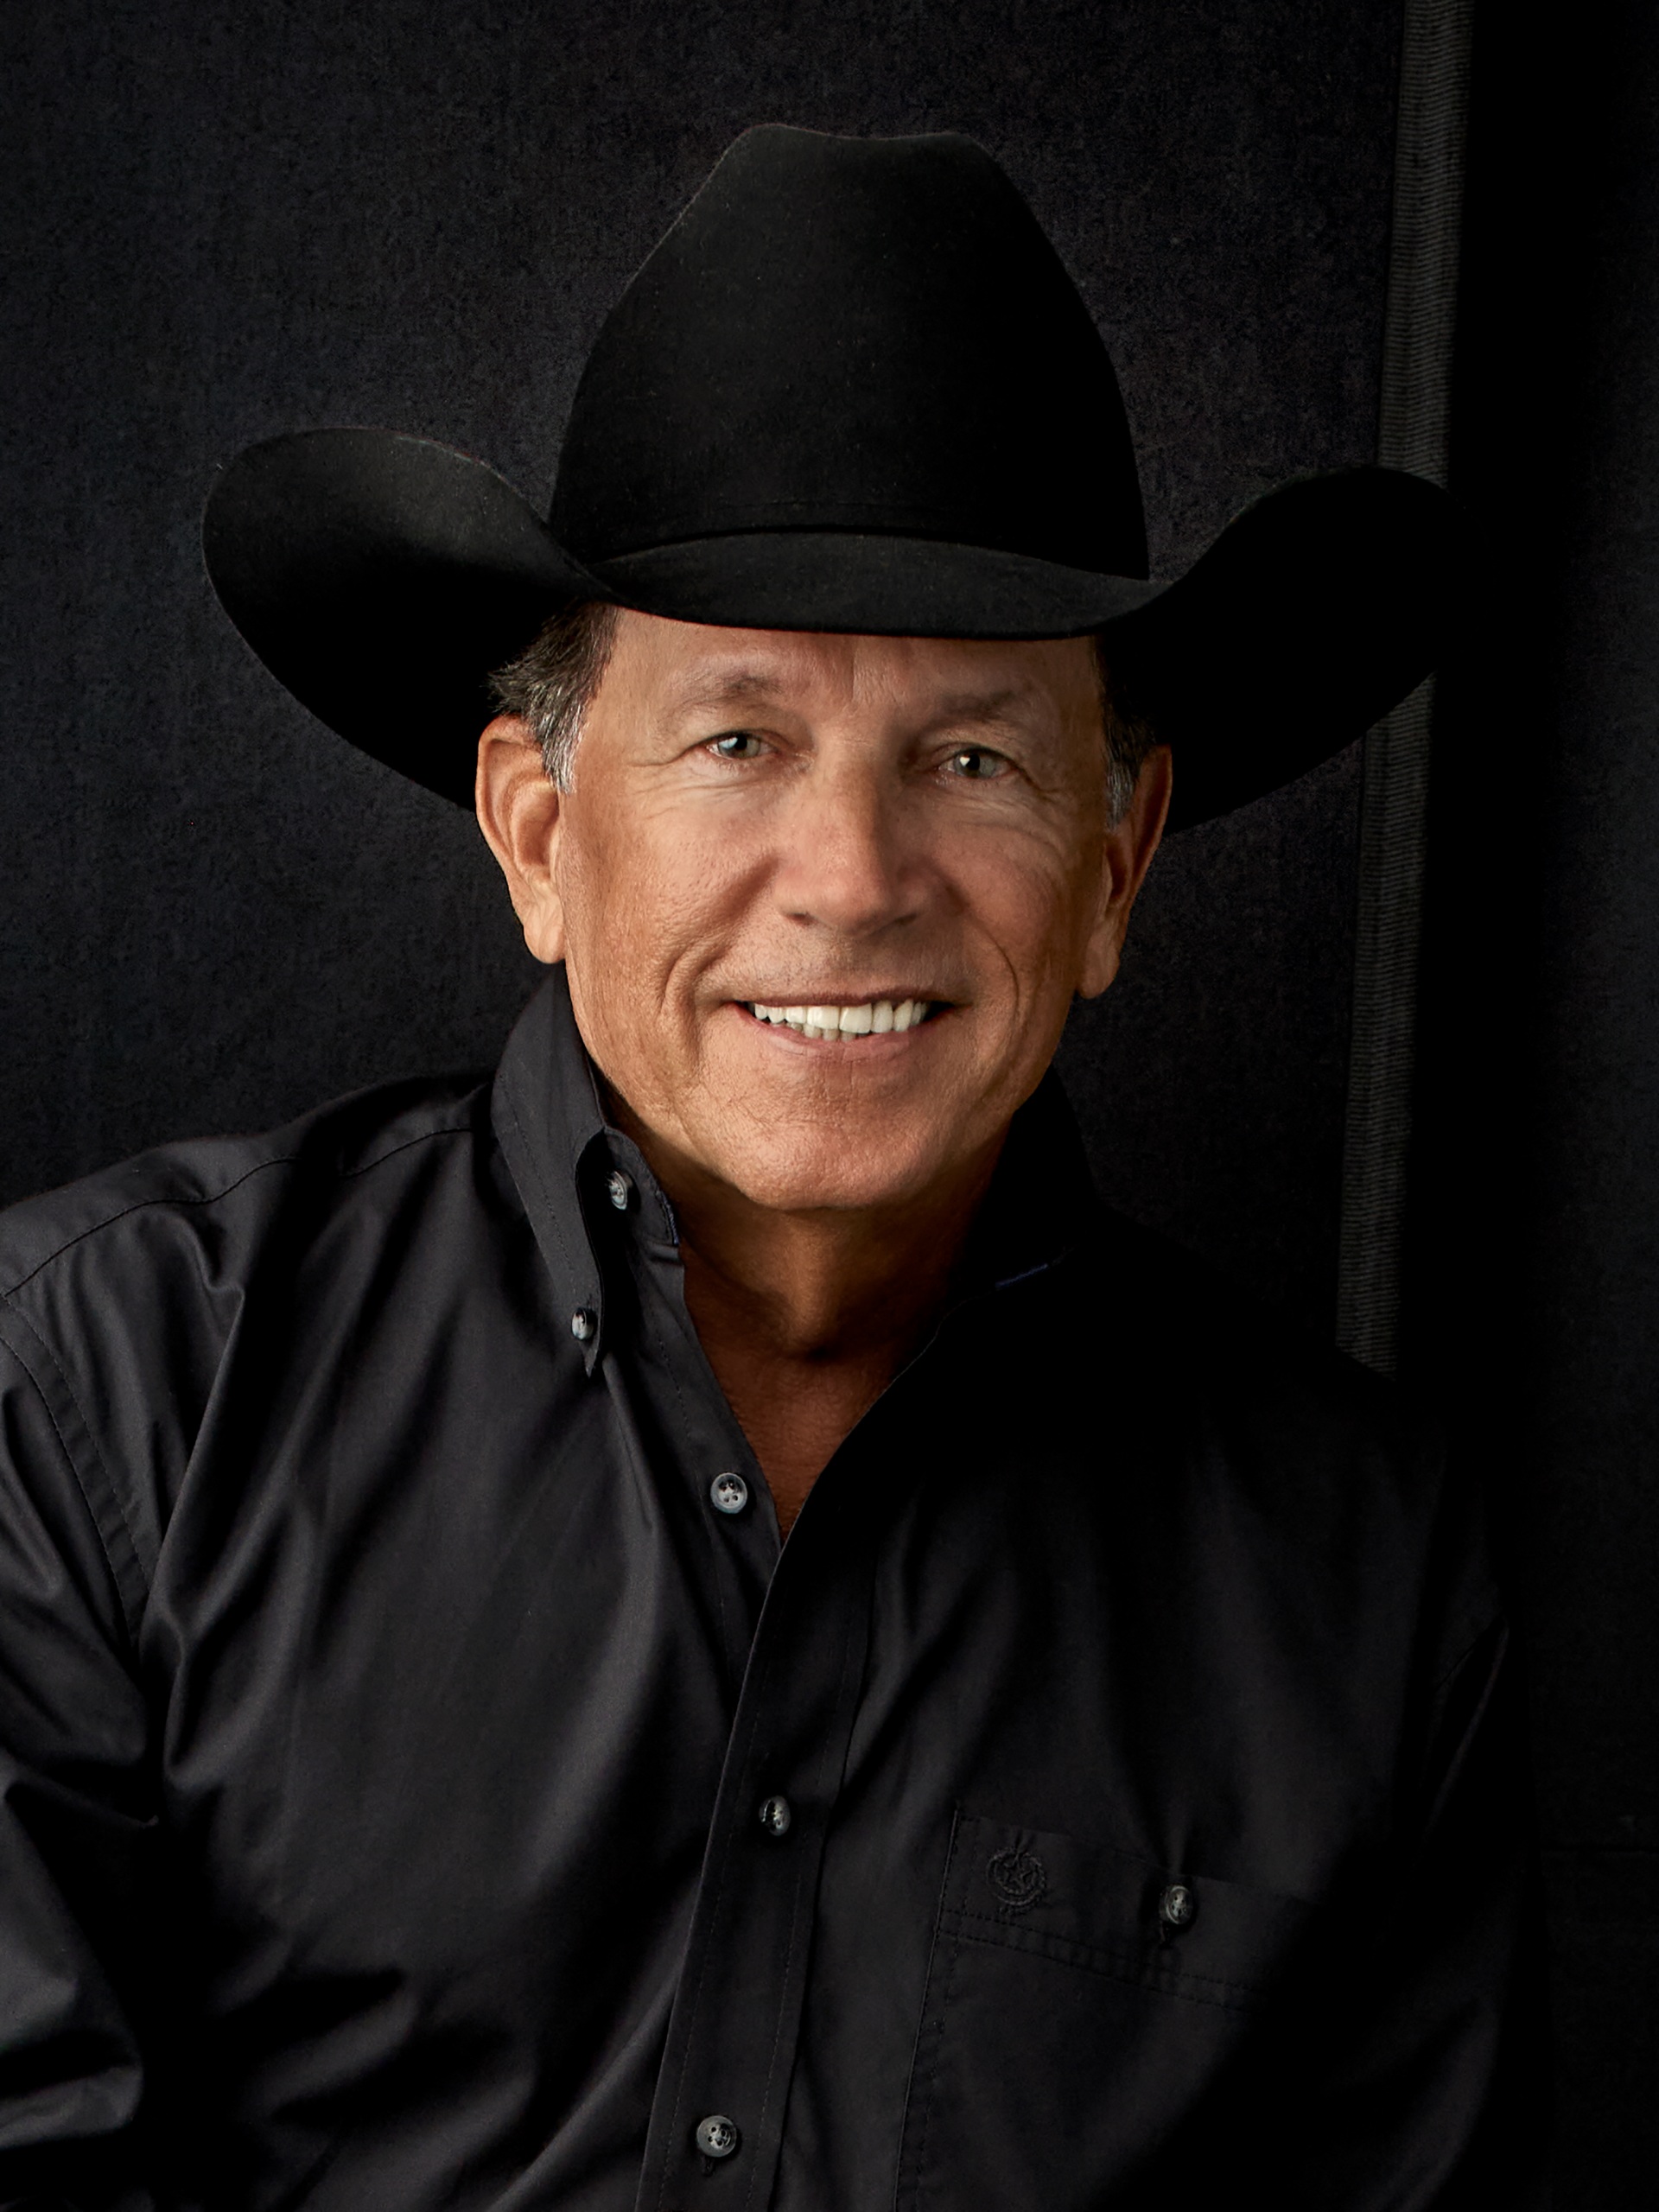 GEORGE STRAIT’S ‘THE KING AT KYLE FIELD’ ON TRACK TO SURPASS 2014 AT&T ATTENDANCE RECORD.